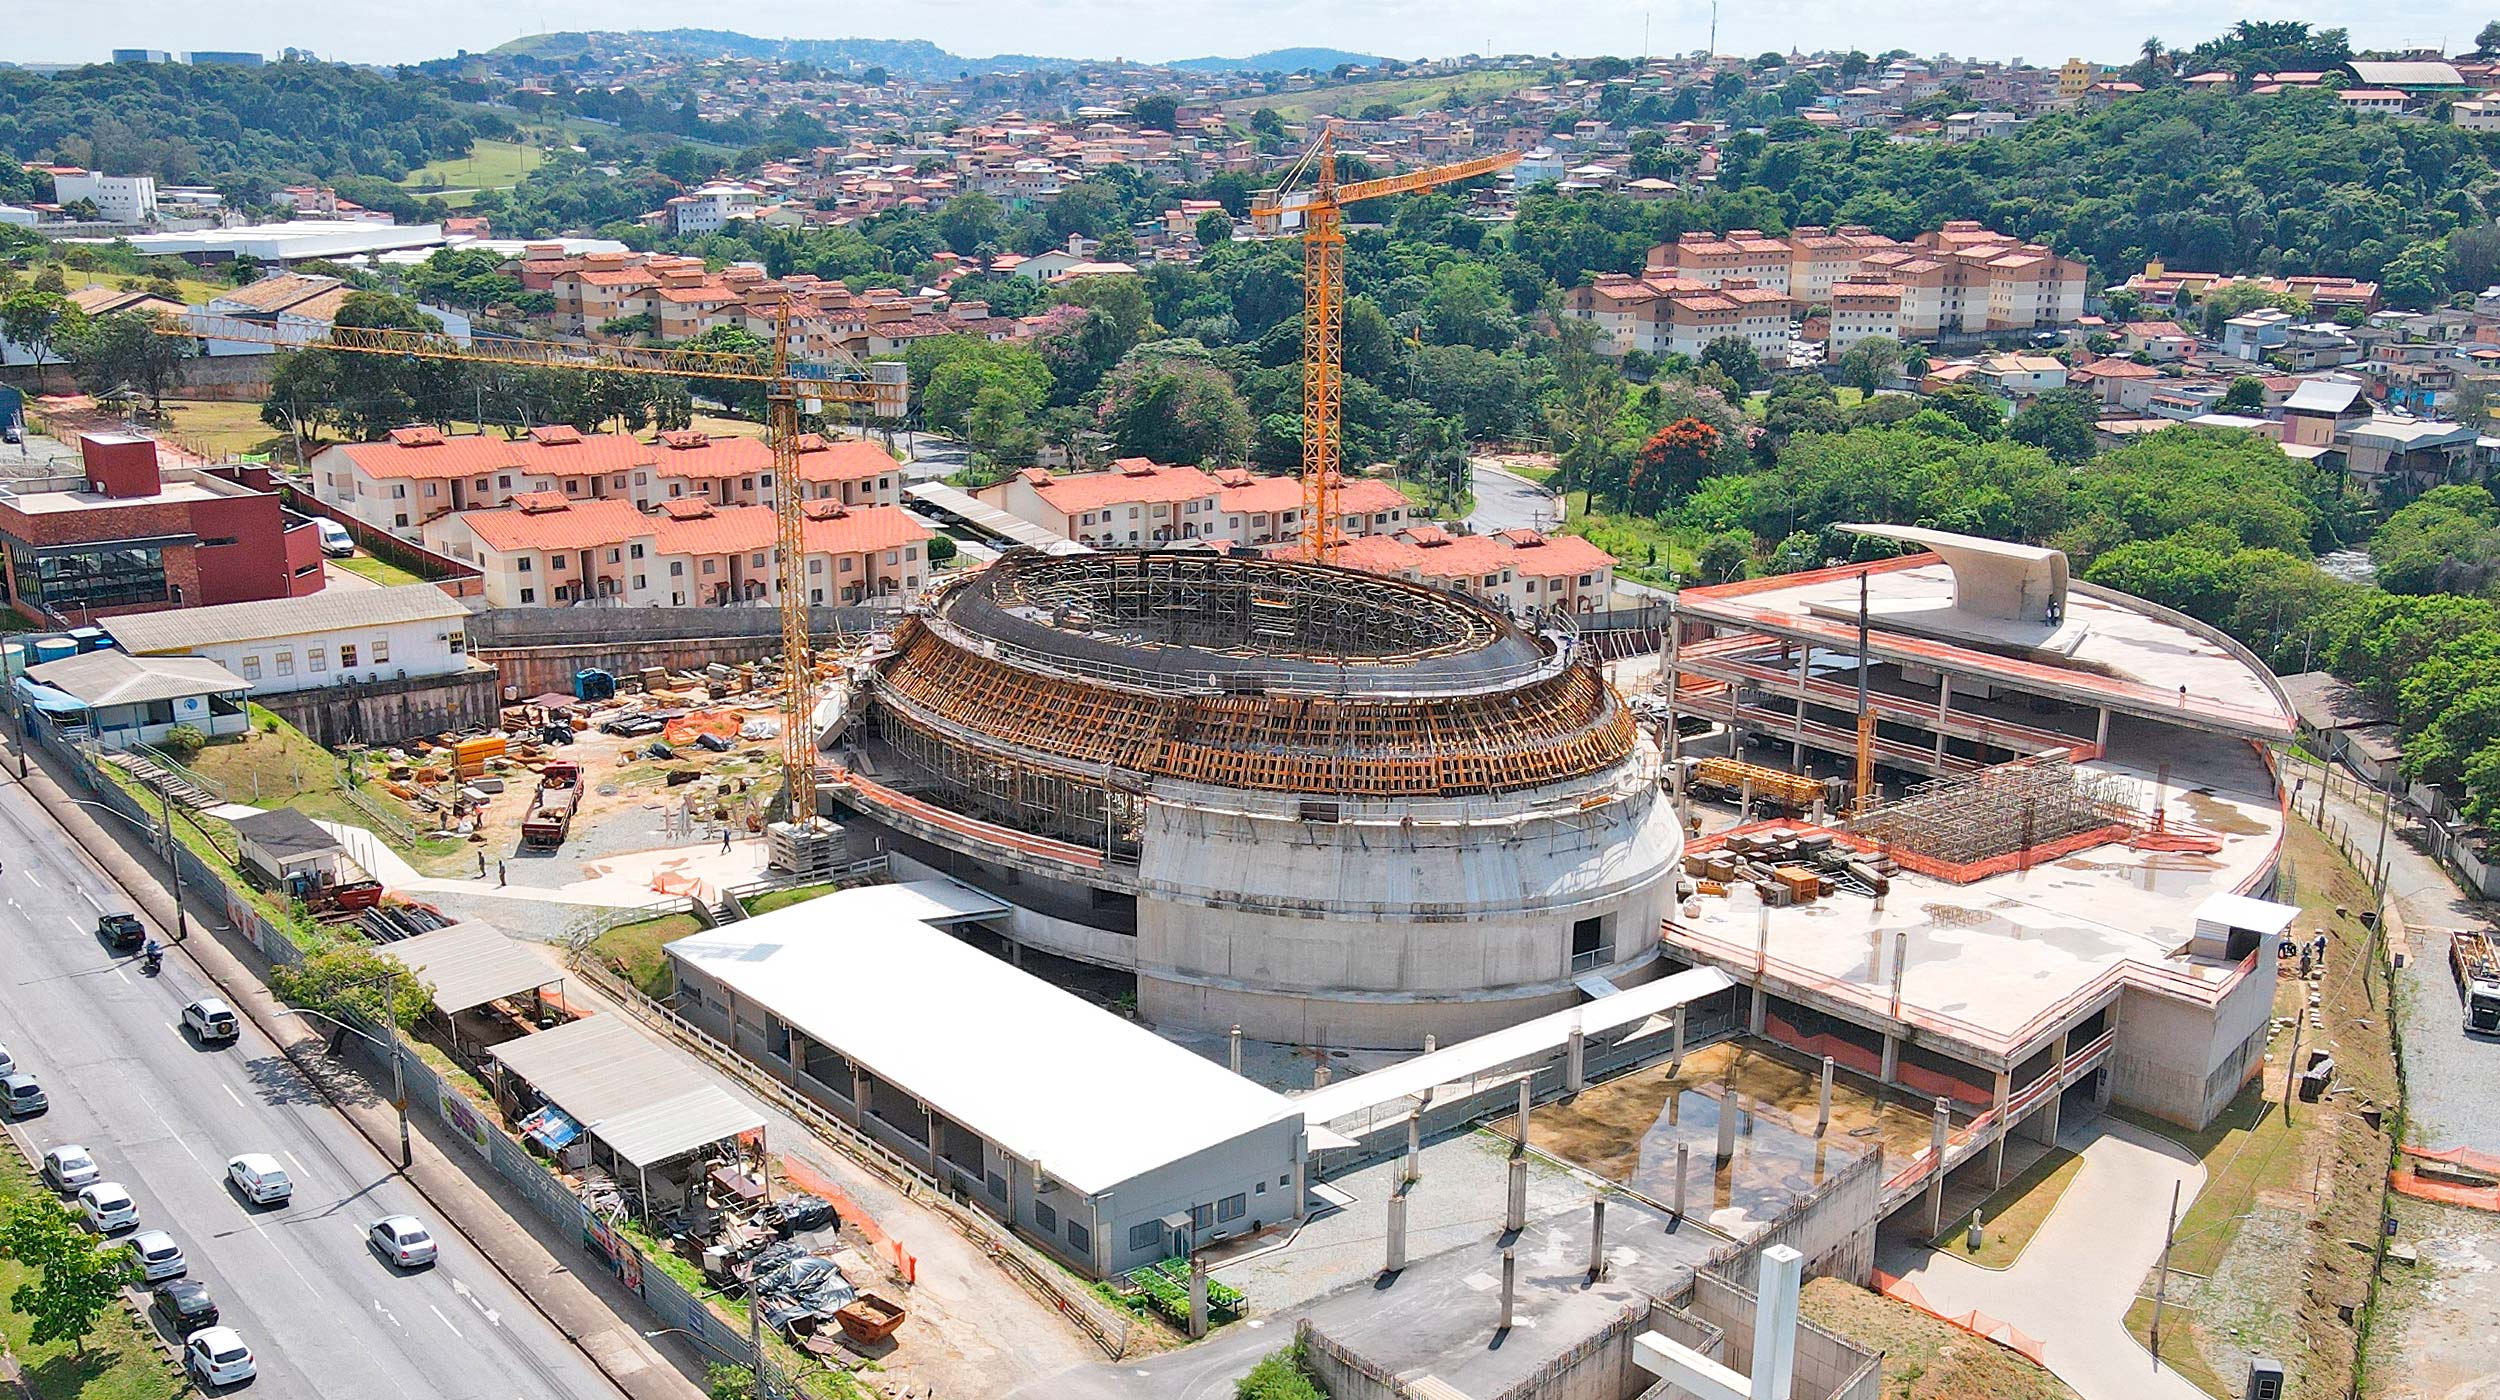 The 'Catedral Cristo Rei' is under construction in Belo Horizonte and, when completed, will be the new headquarters of the Catholic Church in the city. The project, one of the last designed by the Brazilian architect Oscar Niemeyer between 2006 and 2010, will be a landmark building in the city.